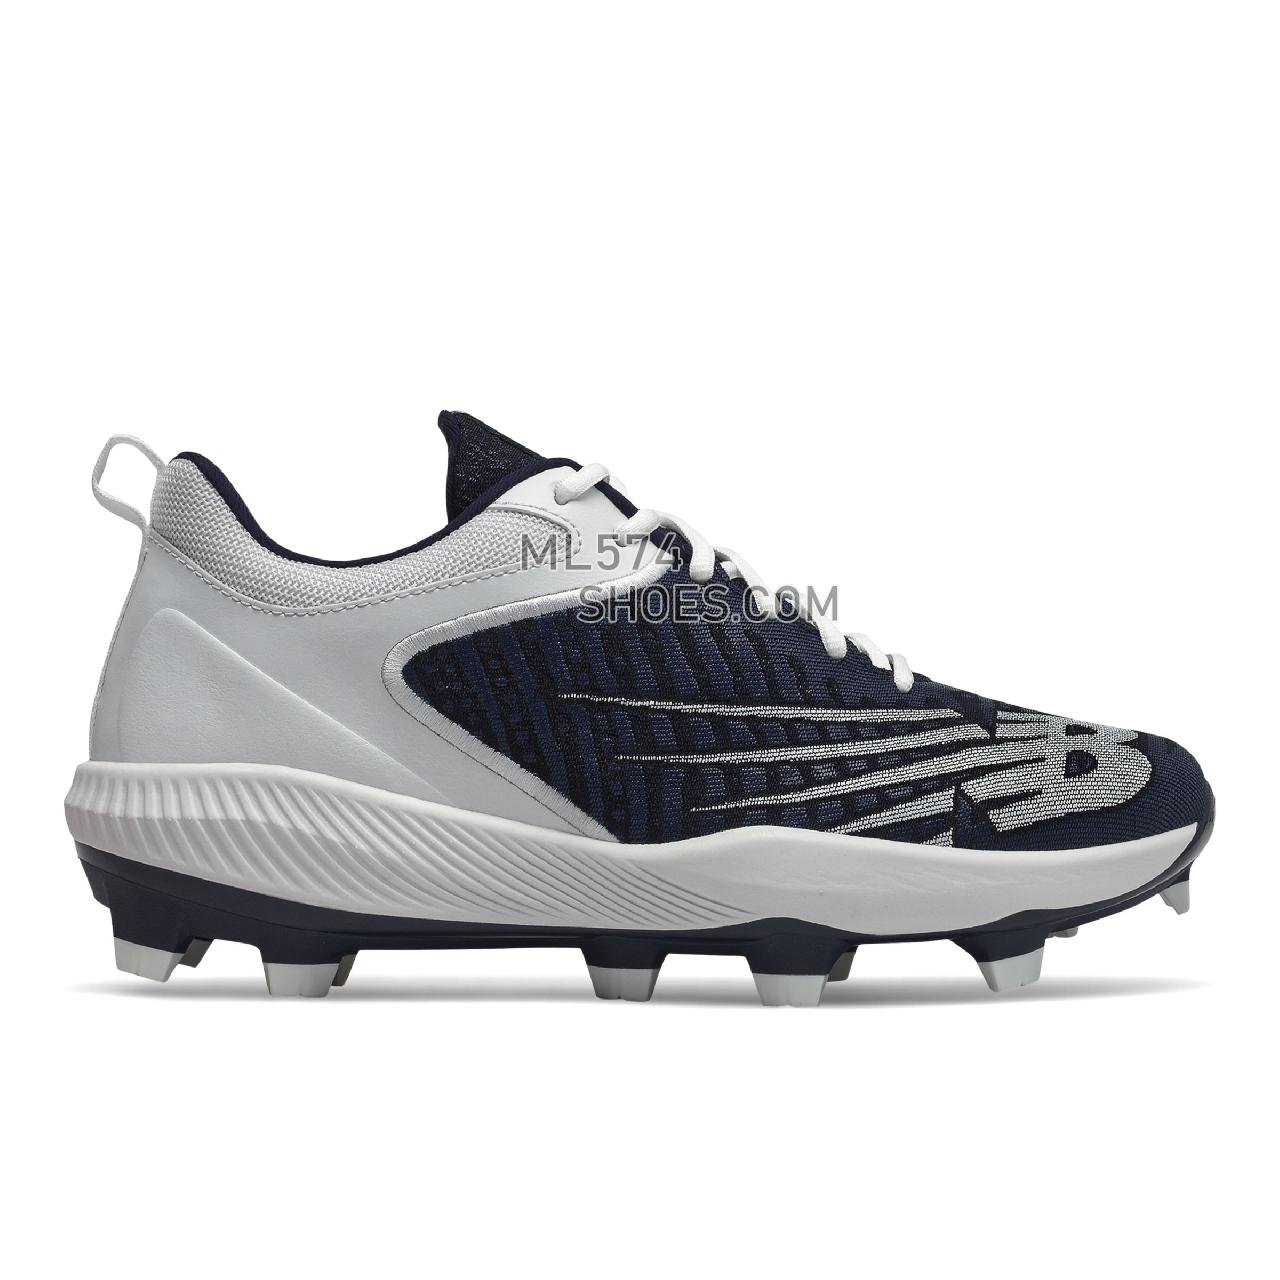 New Balance FuelCell 4040 v6 Molded - Men's Mid-Cut Baseball Cleats - Team Navy with White - PL4040N6